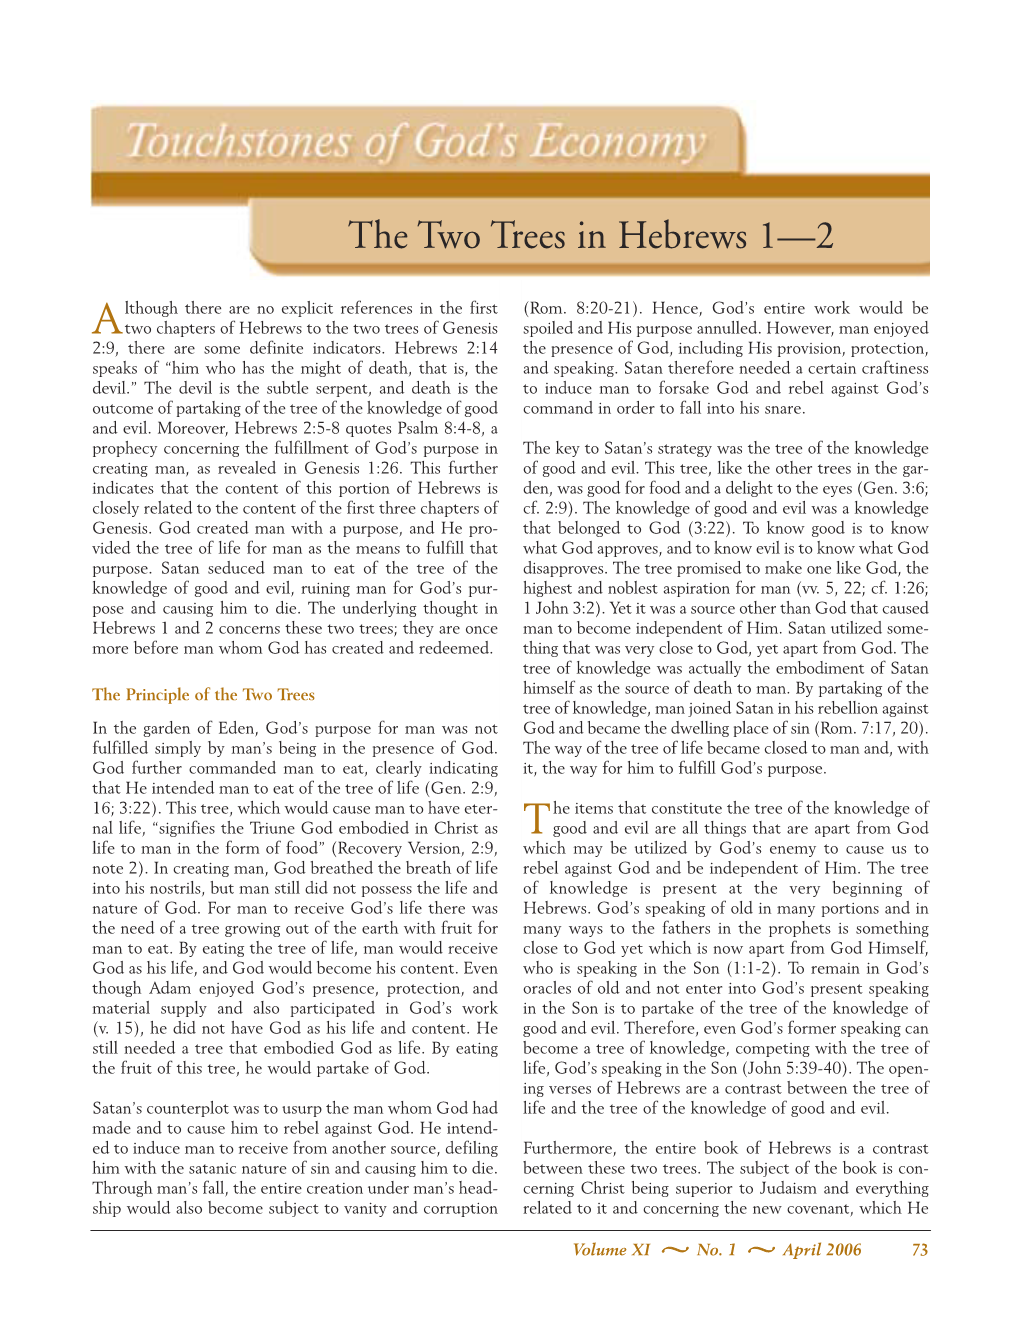 The Two Trees in Hebrews 1—2